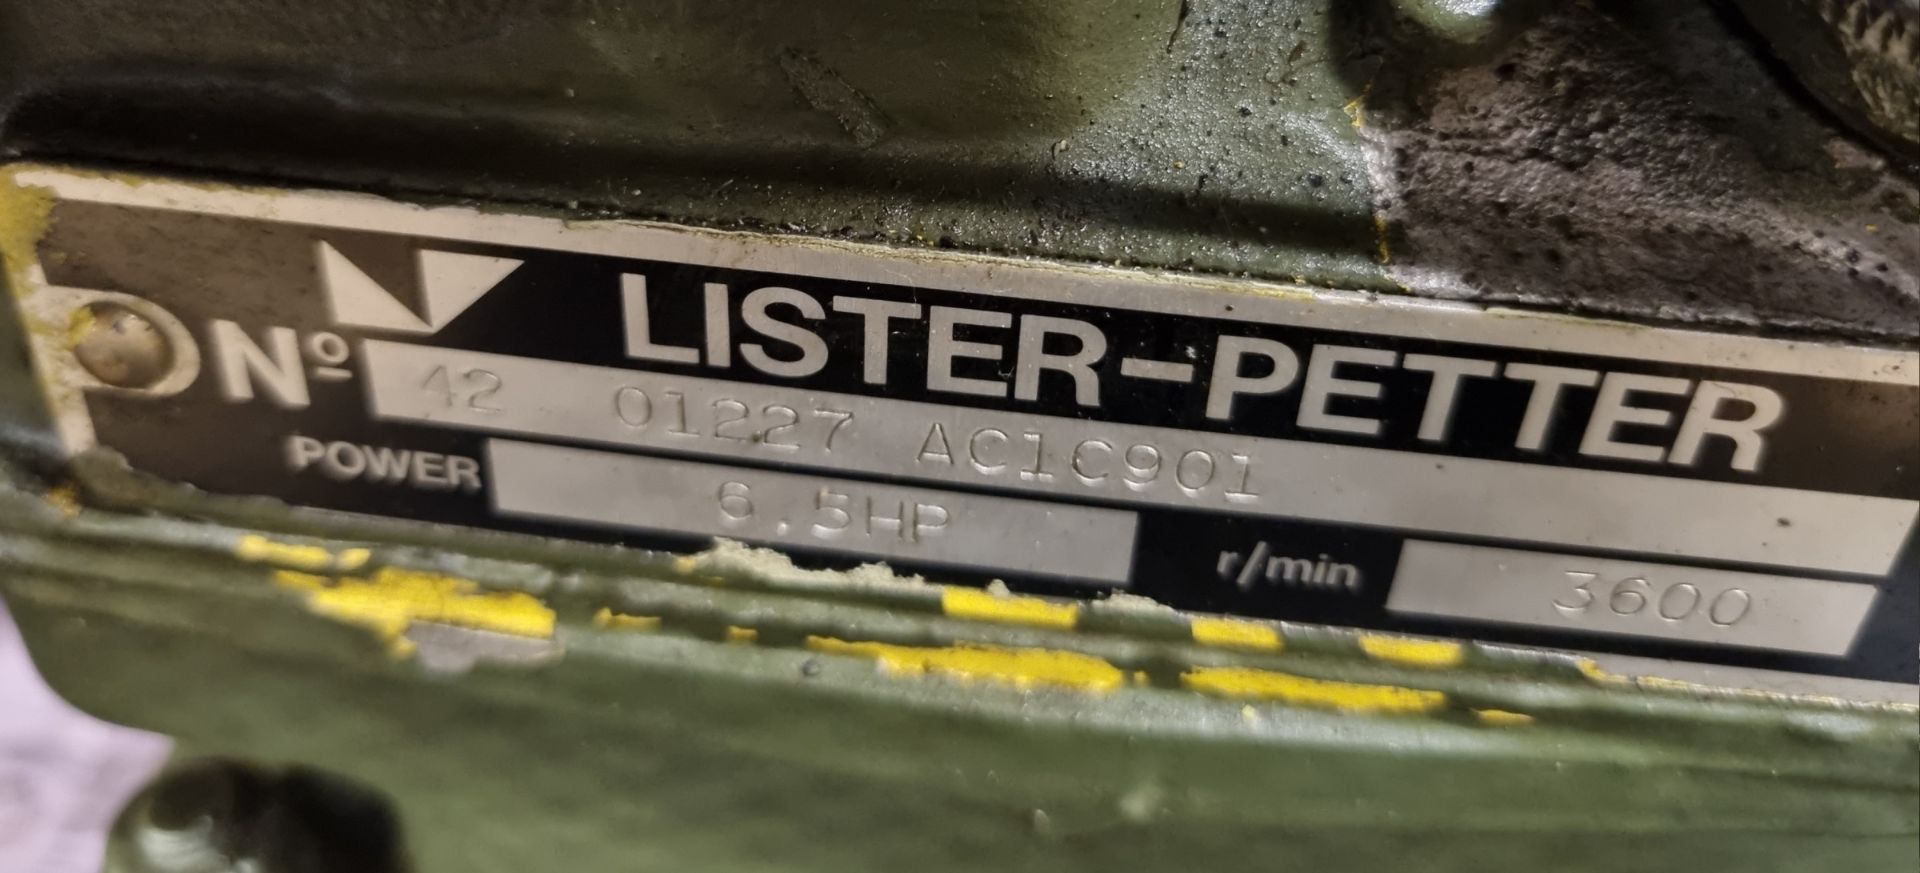 Gilkes Lister-Petter 6.2hp diesel centrifugal pump unit - Image 6 of 6